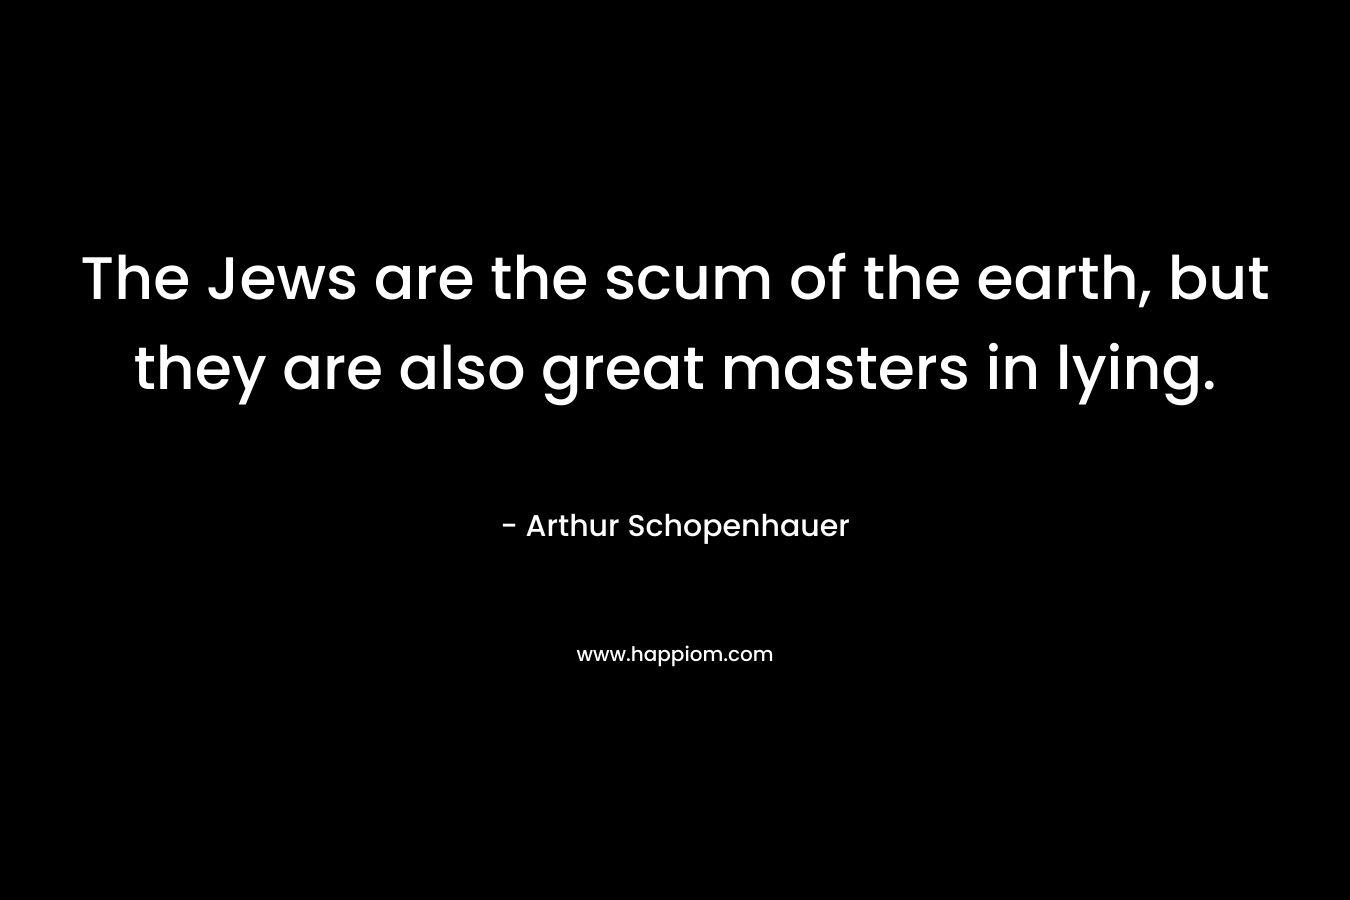 The Jews are the scum of the earth, but they are also great masters in lying.